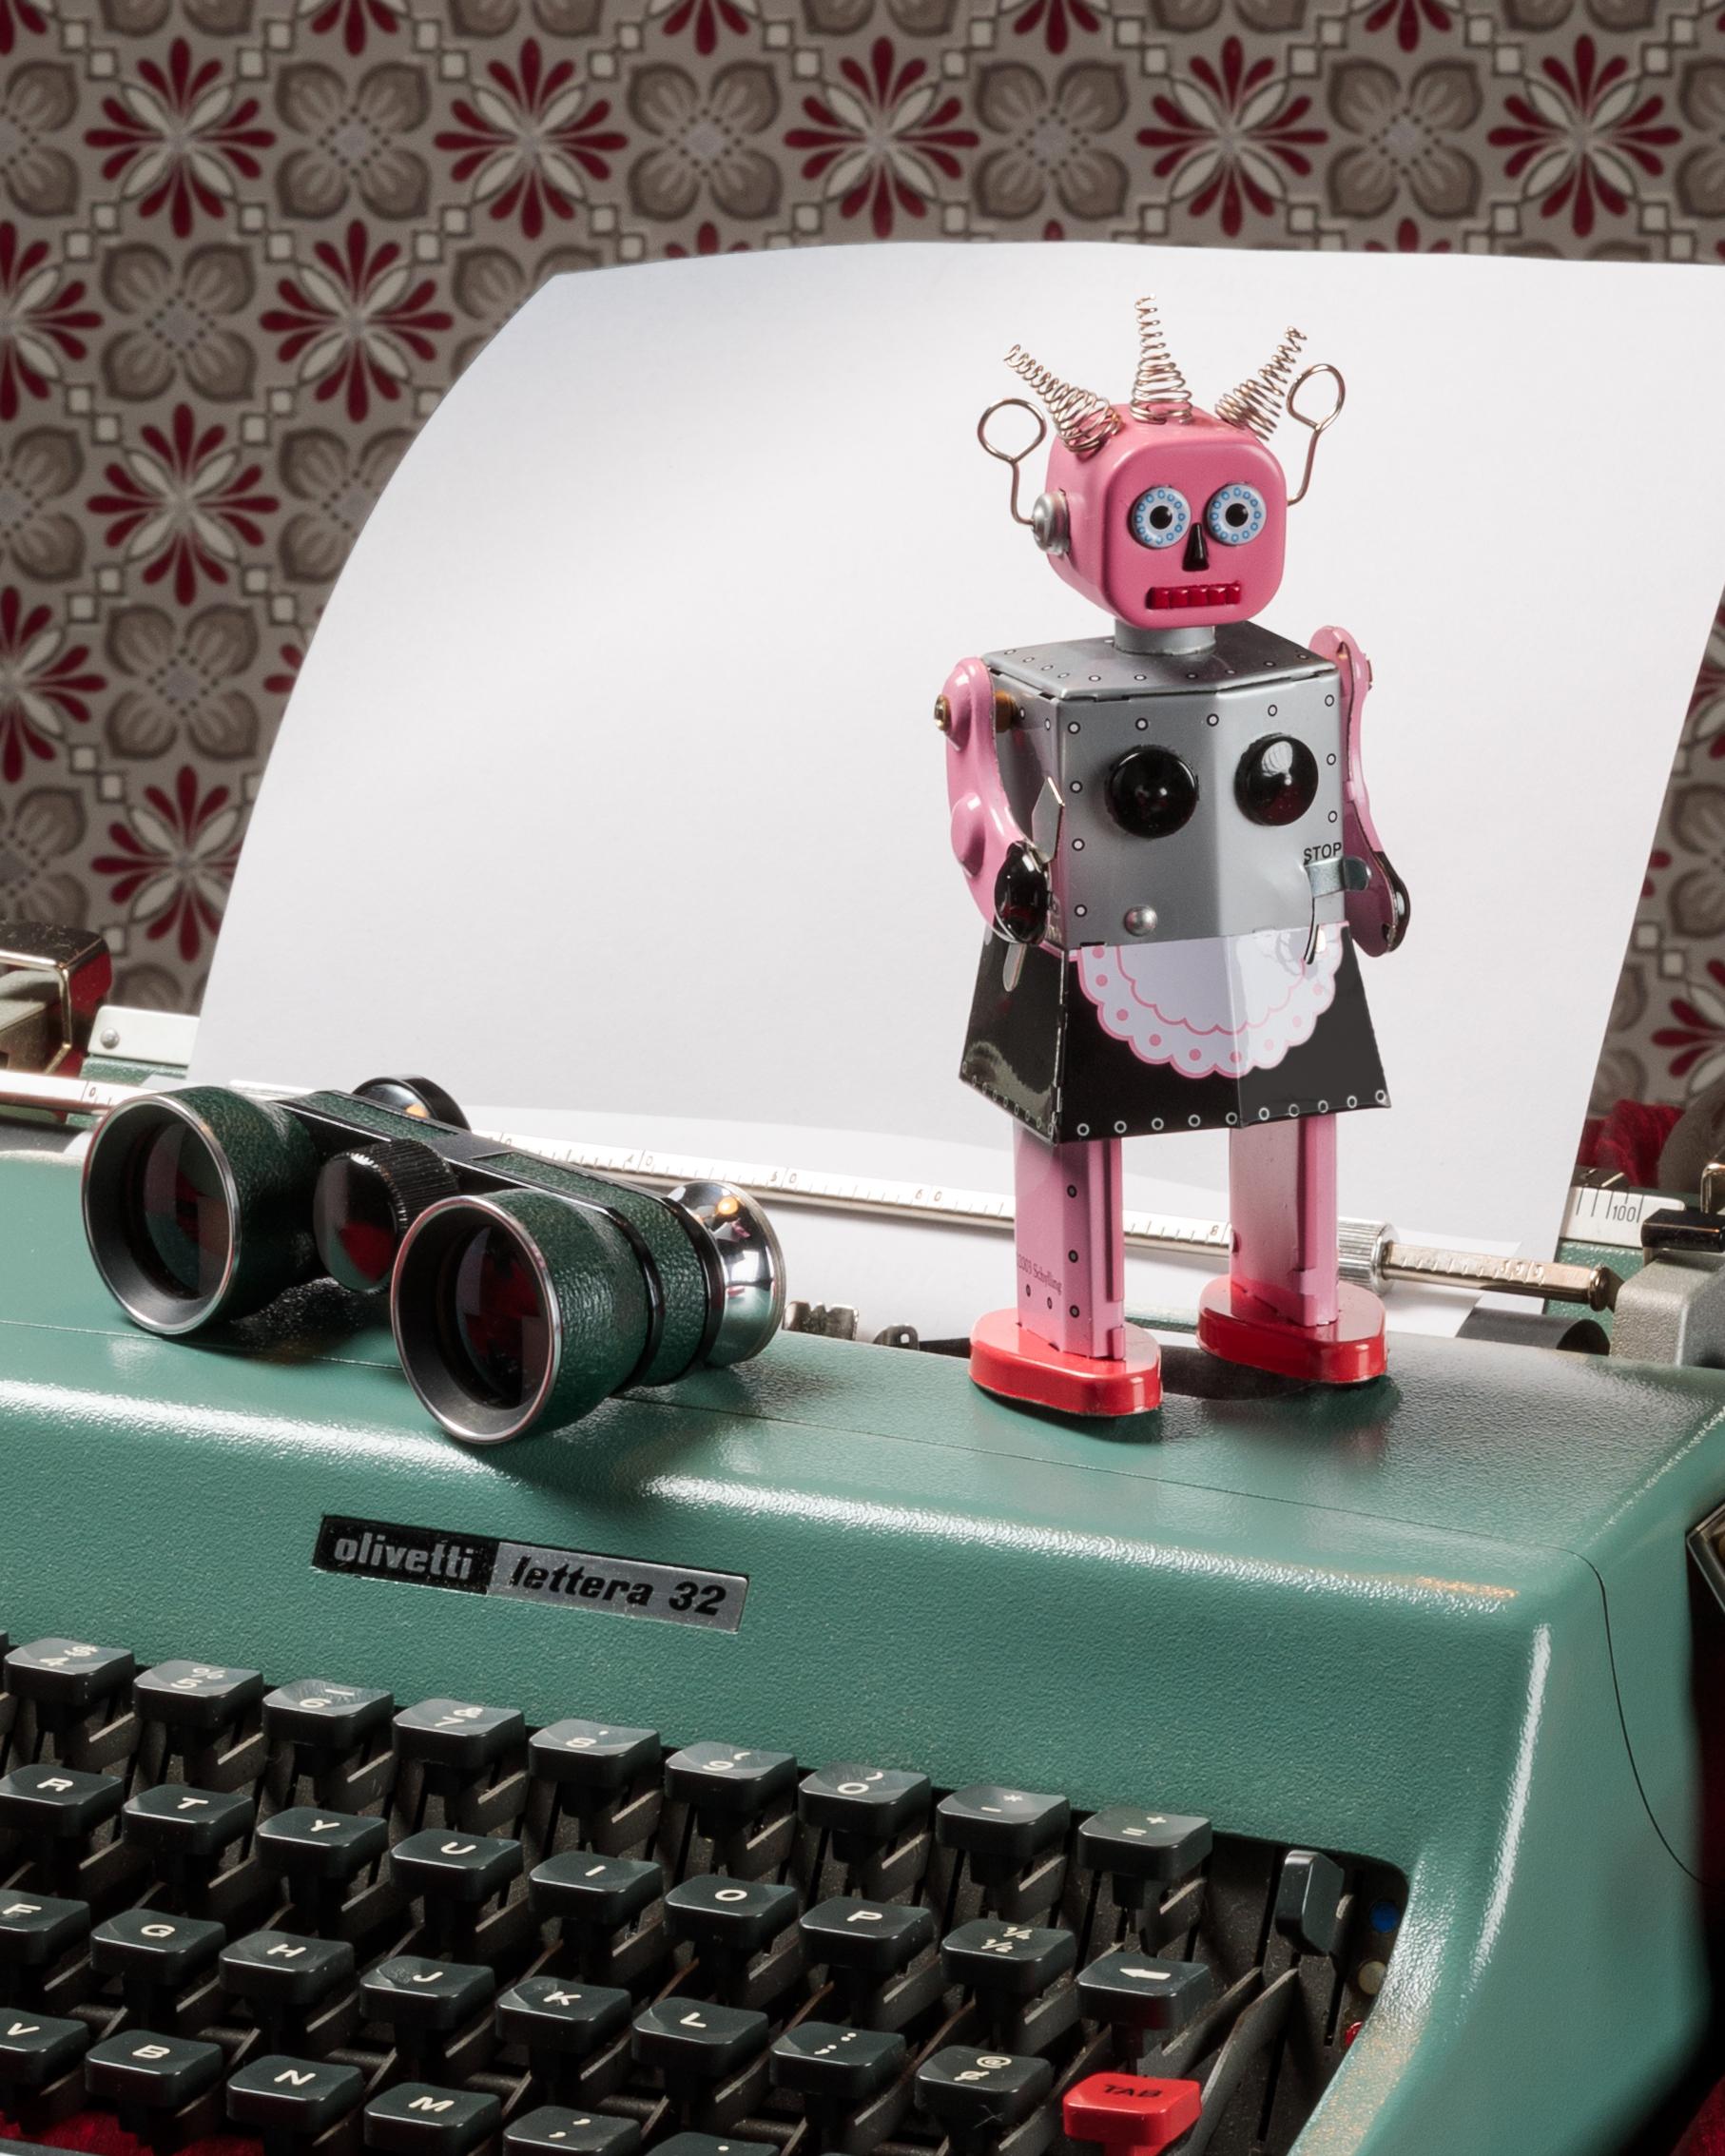 “Still Life with Robot” Still-life Photograph of Vintage Typewriter and Tin Toy 2